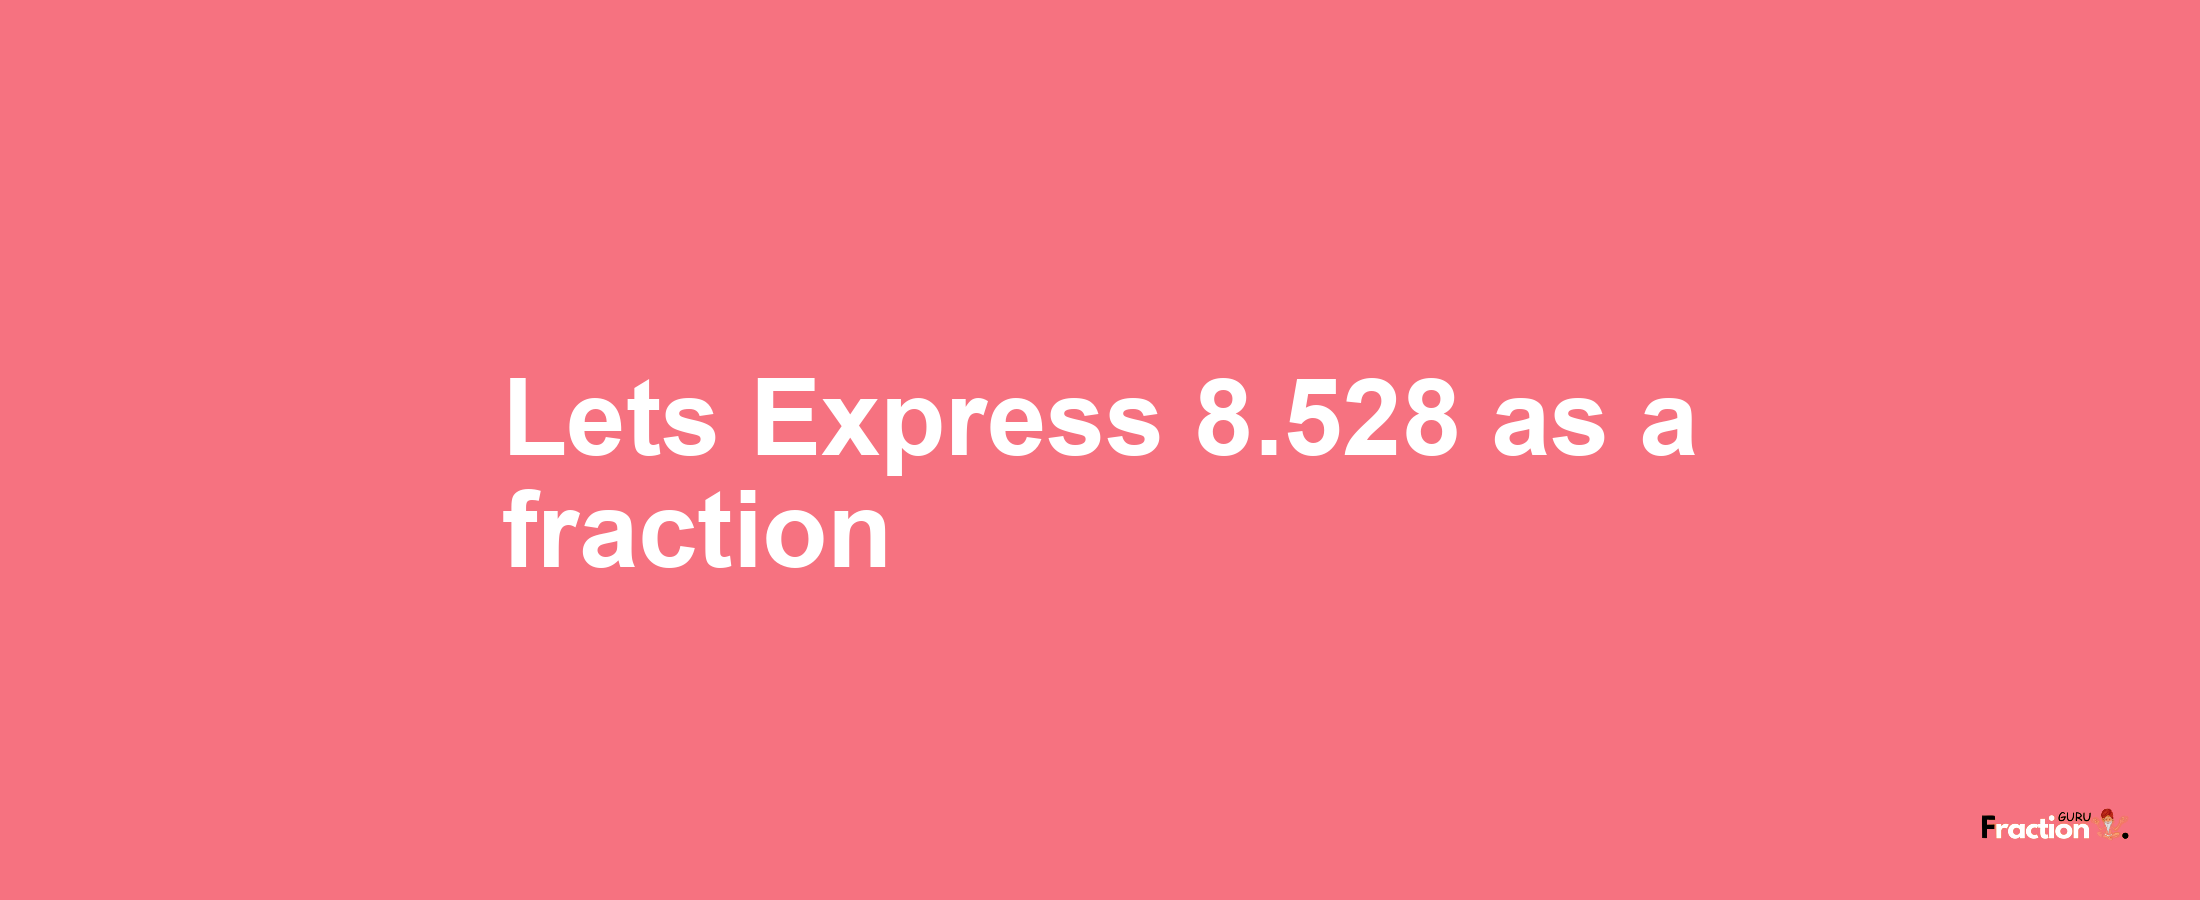 Lets Express 8.528 as afraction